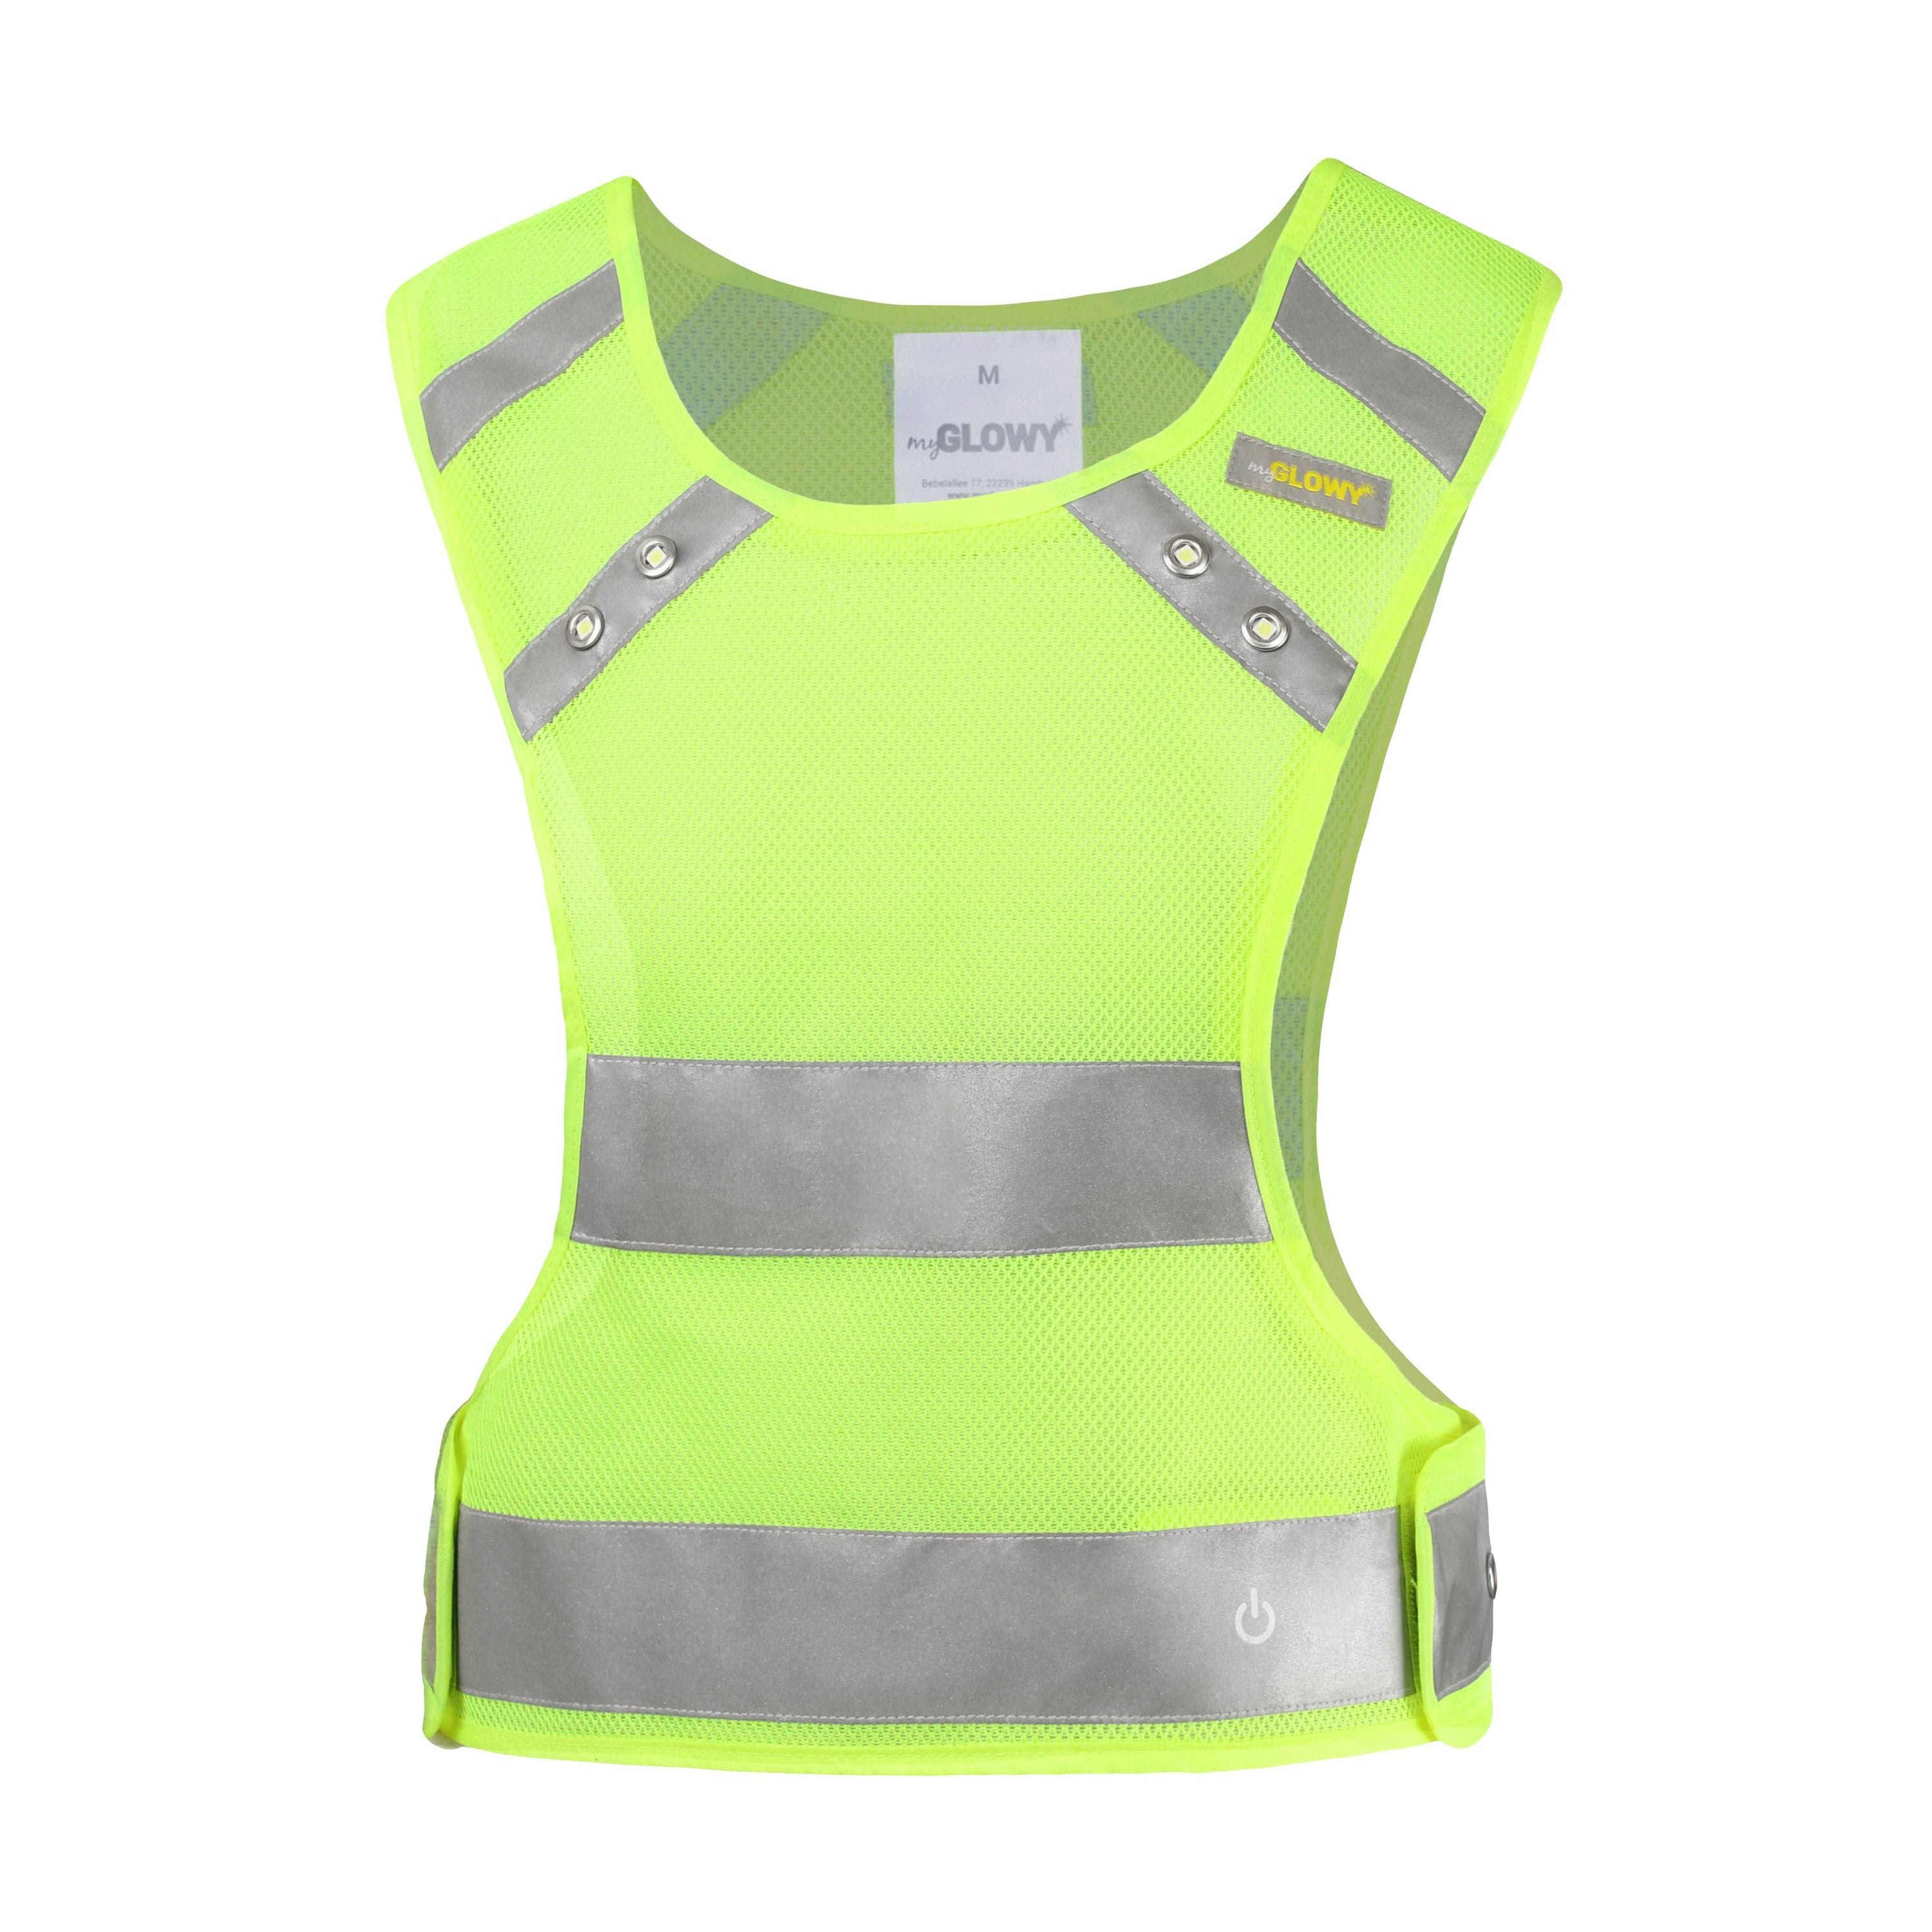 Sports vest for adults